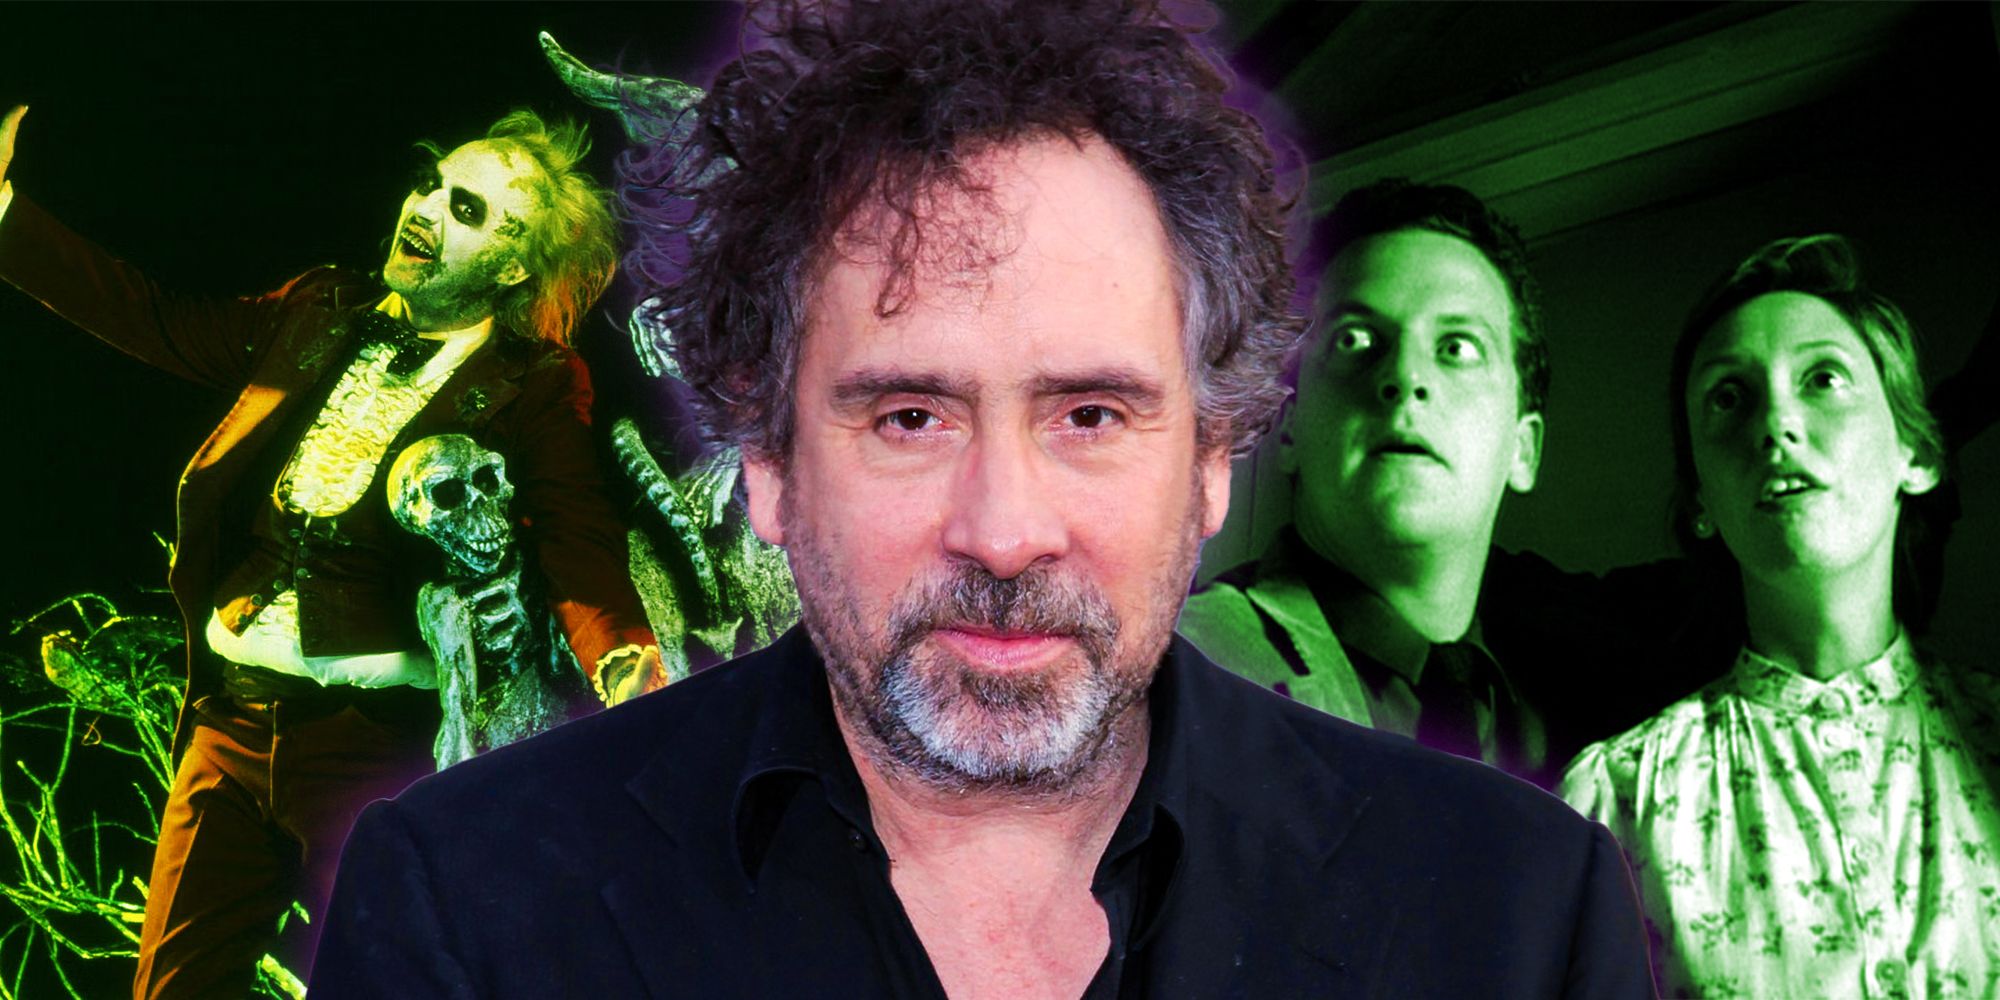 Michael Keaton in Beetlejuice, Daniel Stern and Shelley Duvall in Frankenweenie, and Tim Burton in center